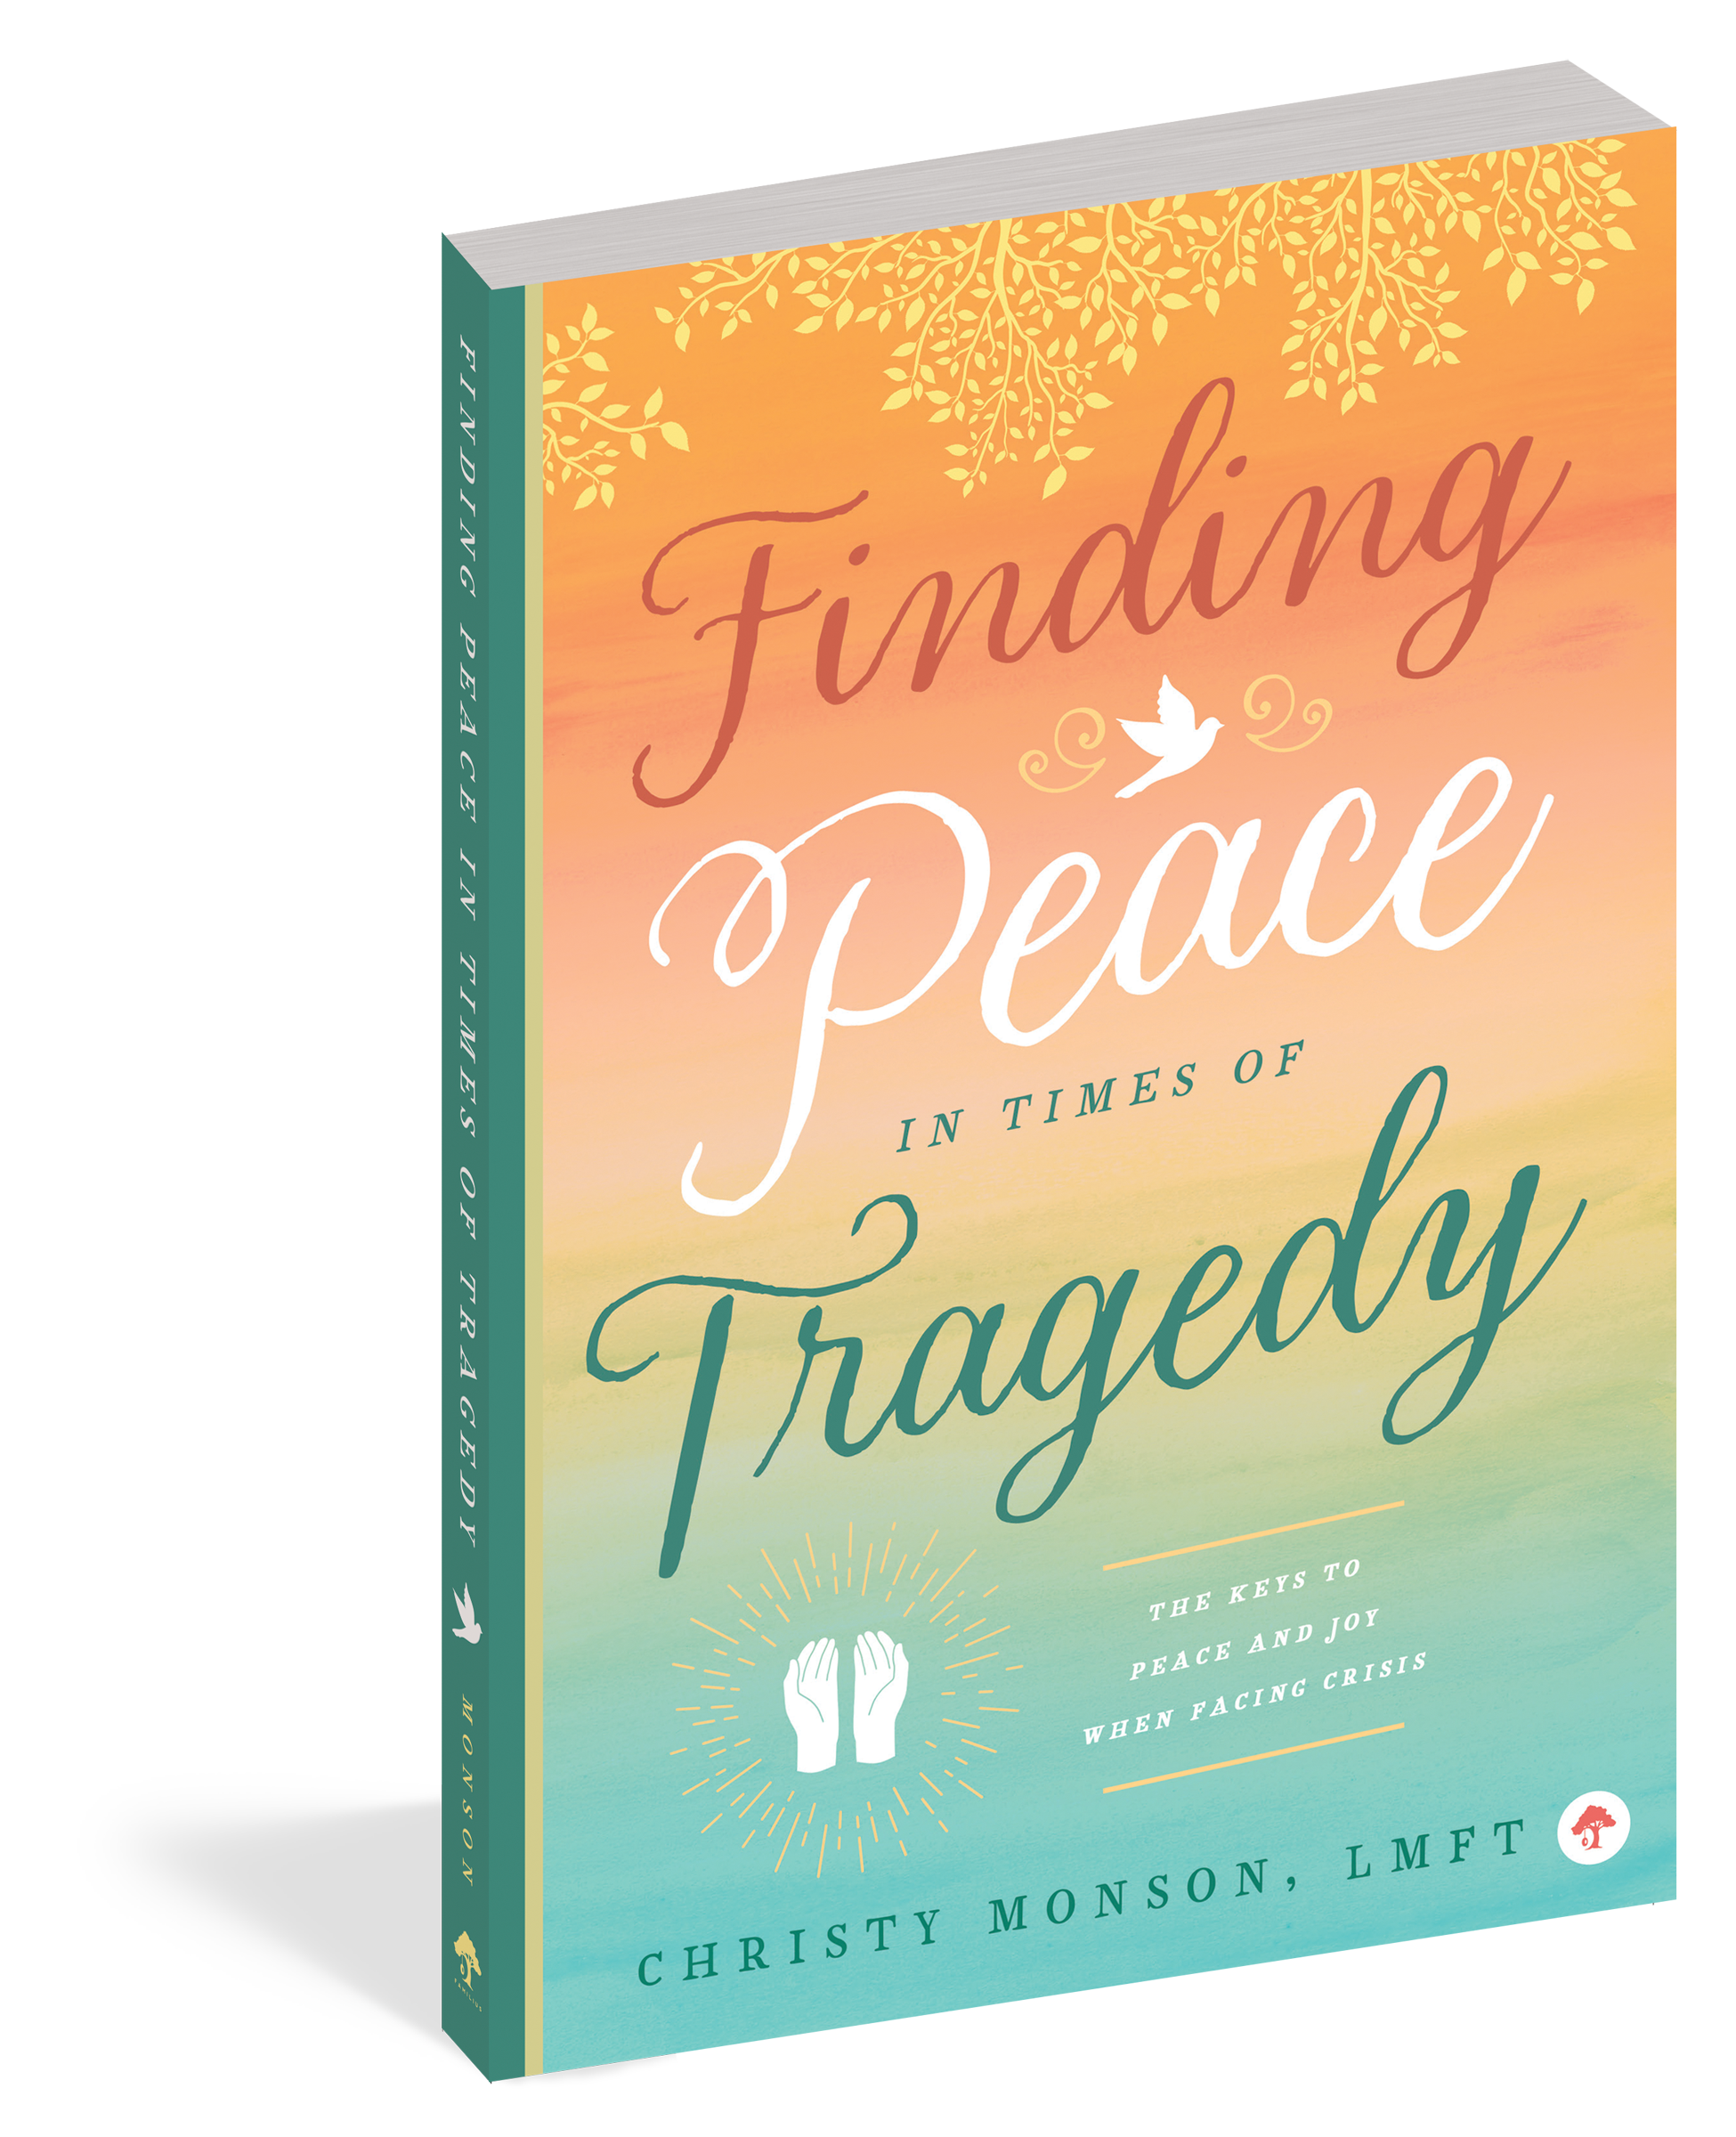 The cover of the book Finding Peace in Times of Tragedy.